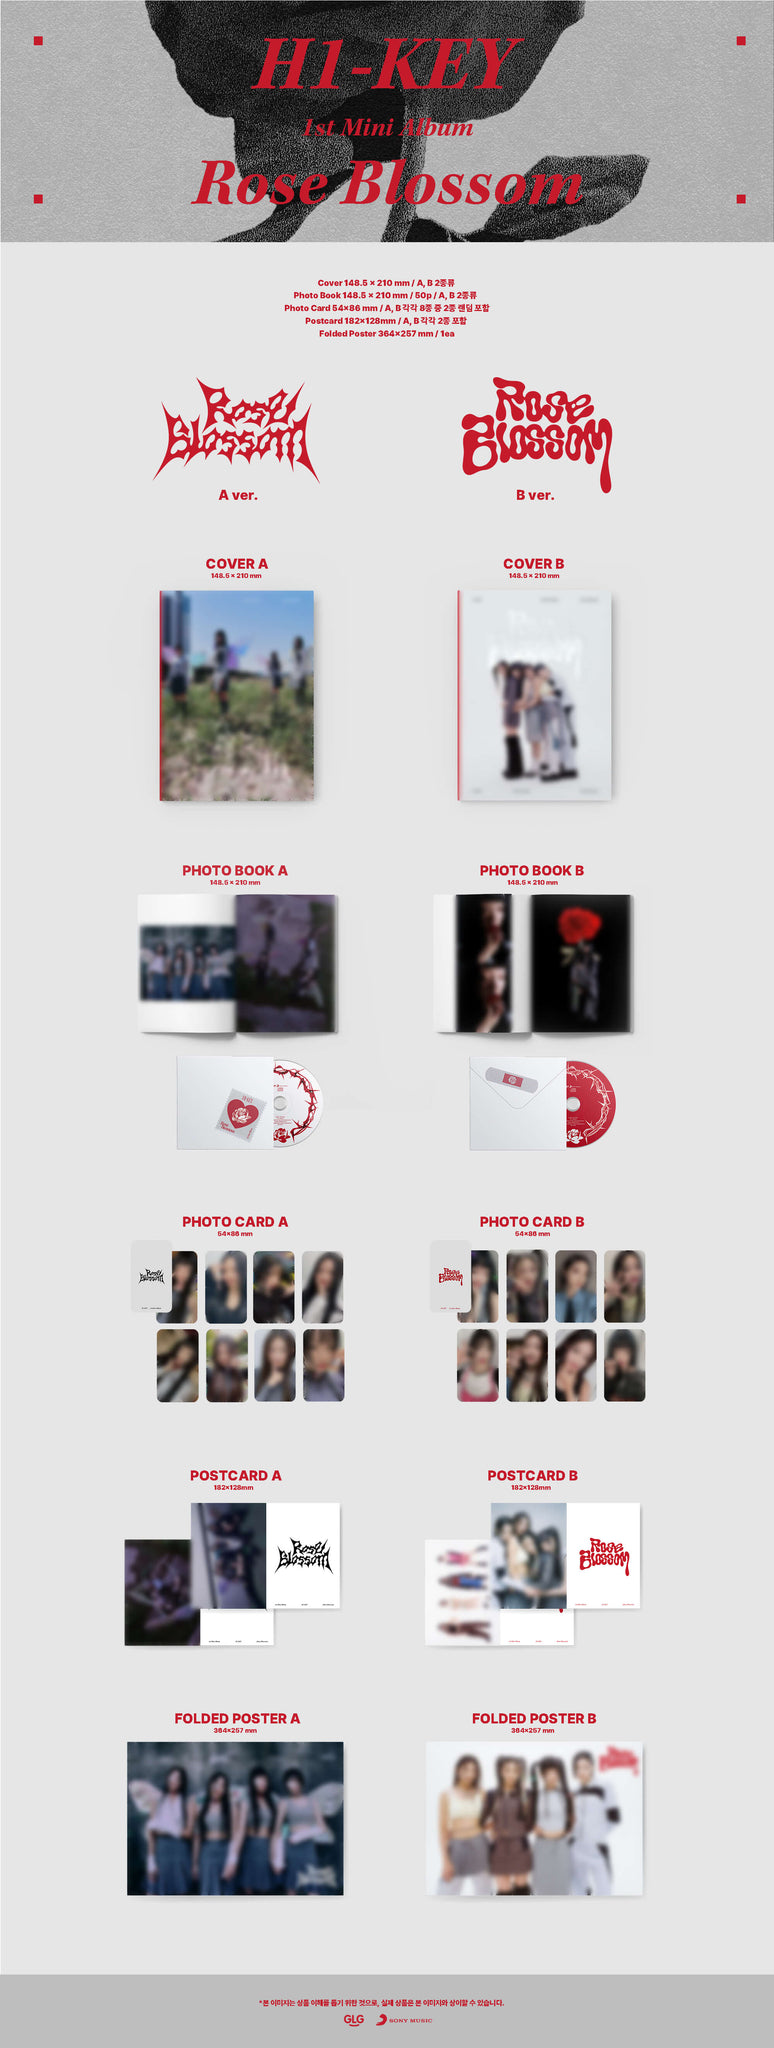 H1-KEY Rose Blossom Inclusions Cover Photobook CD Photocard Postcard Folded Poster